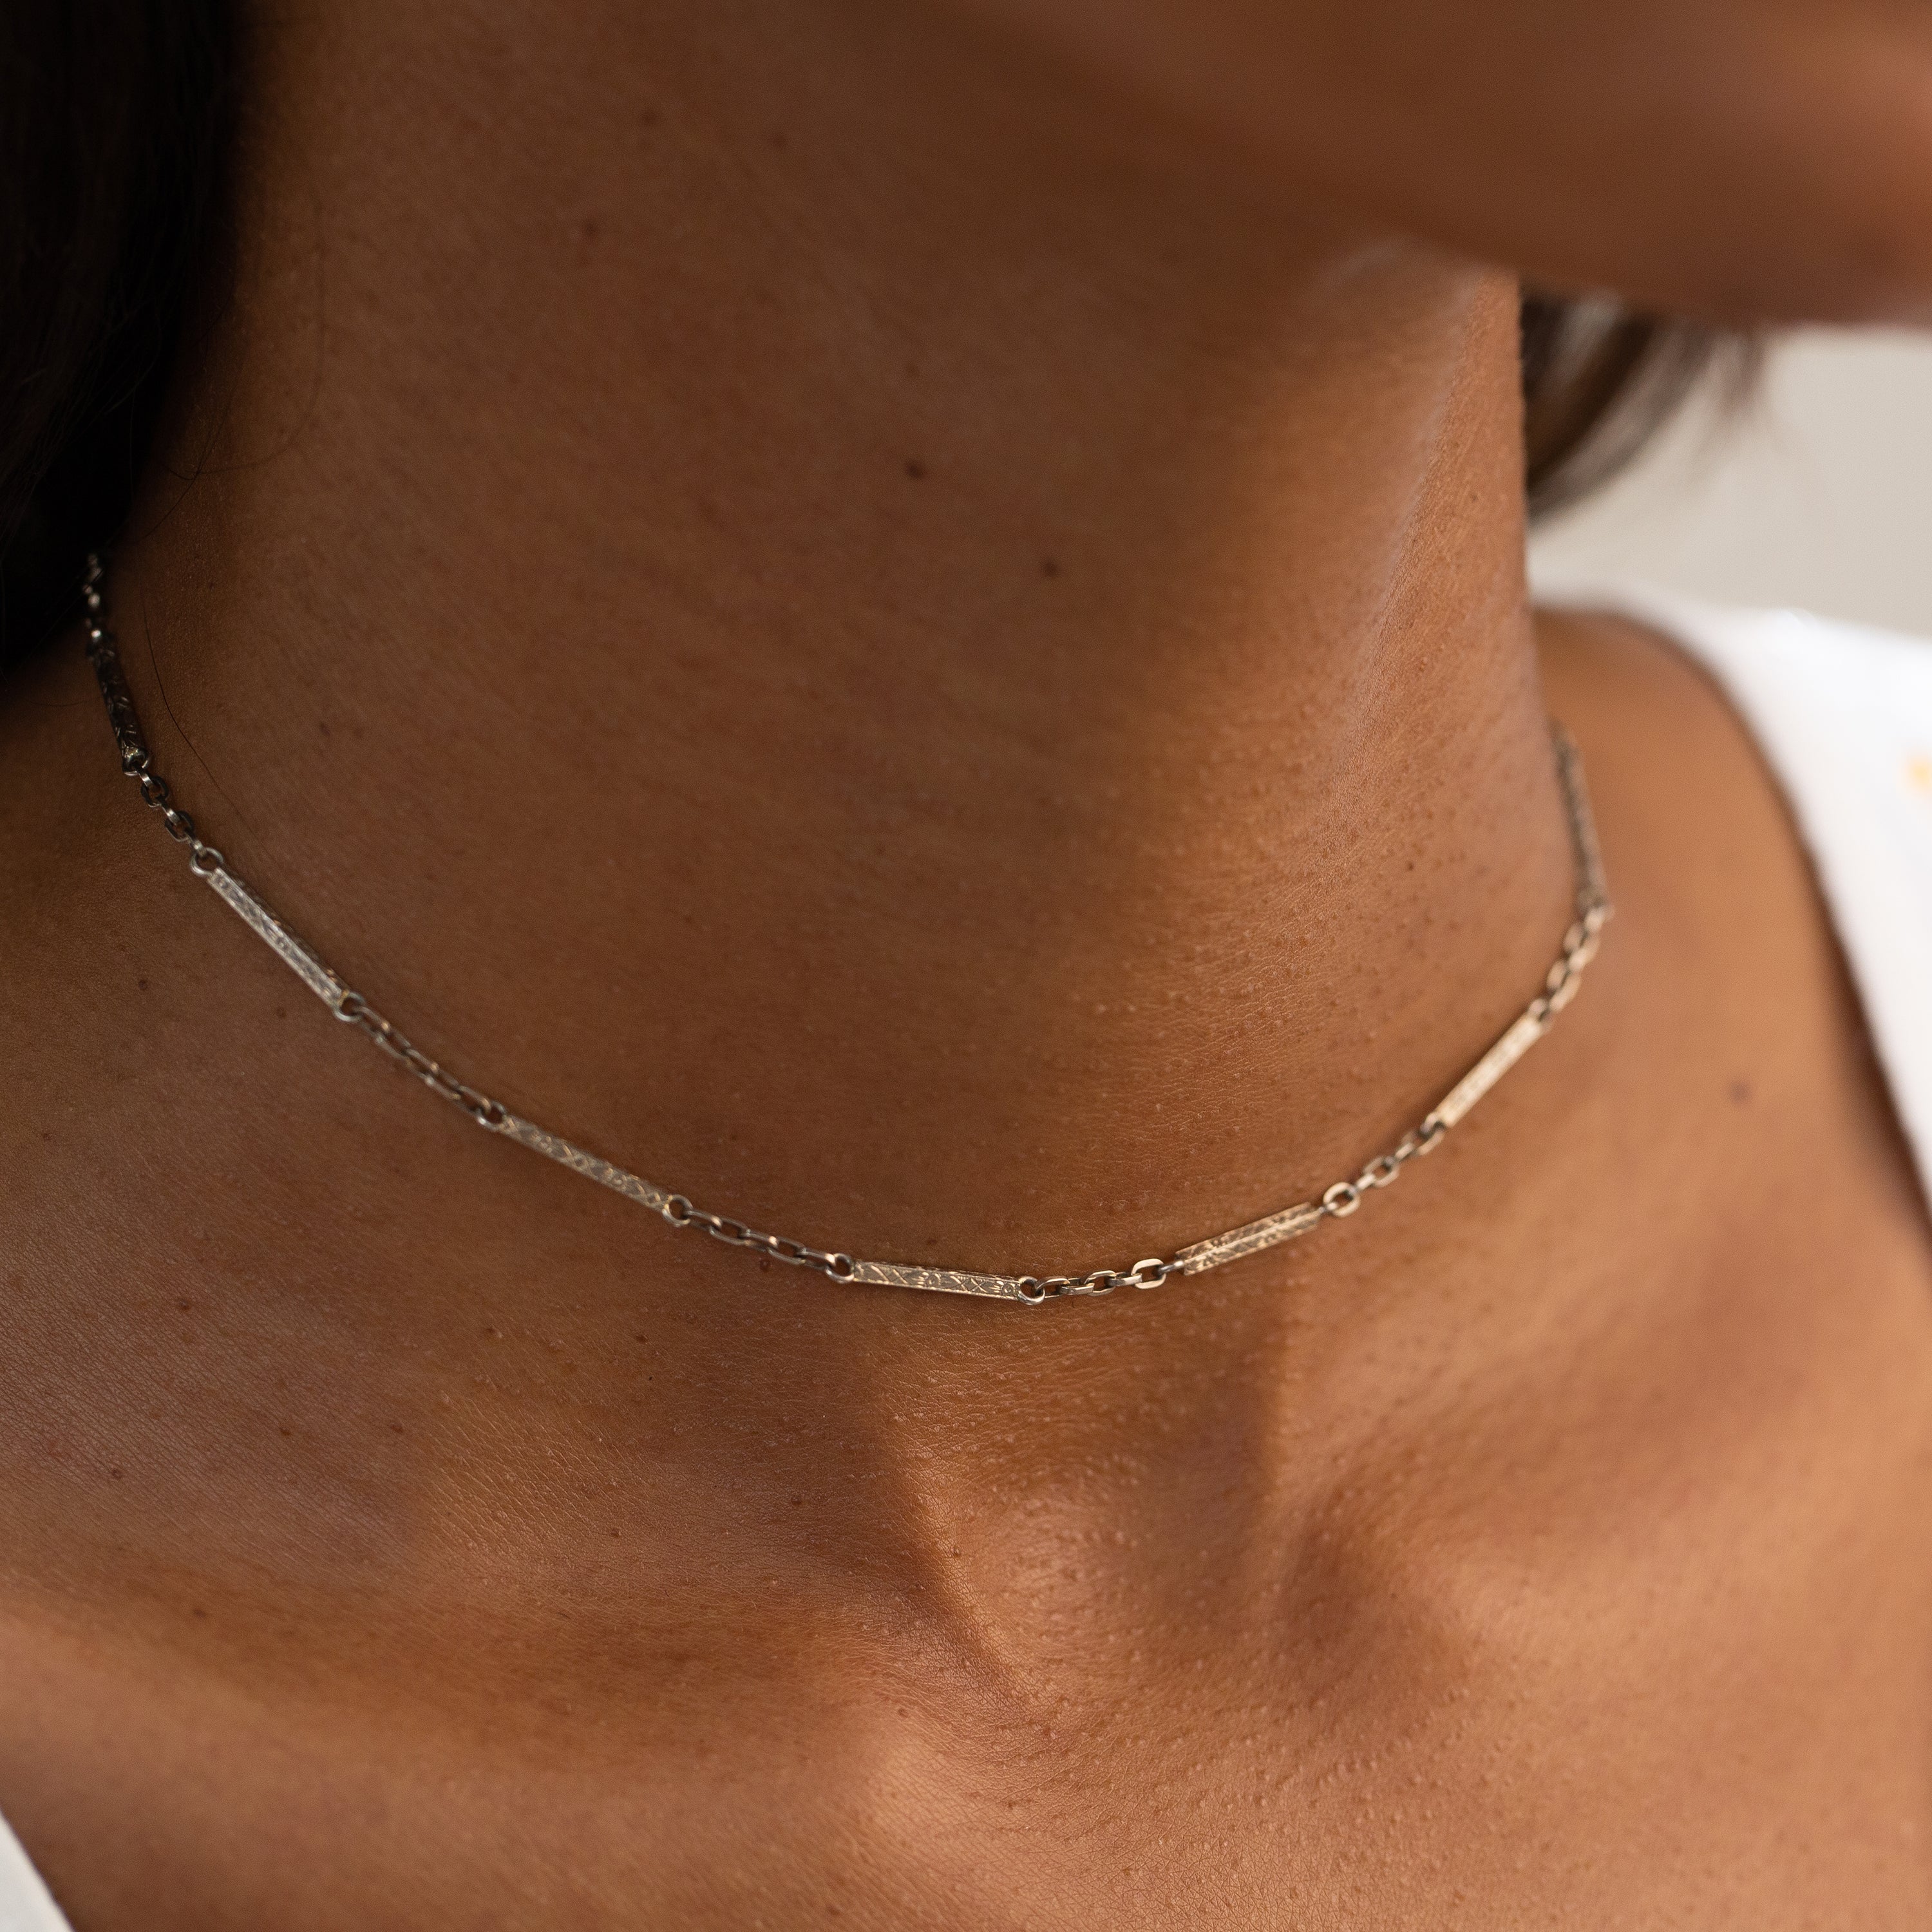 Bar and Link 10k White Gold 14" Choker Necklace